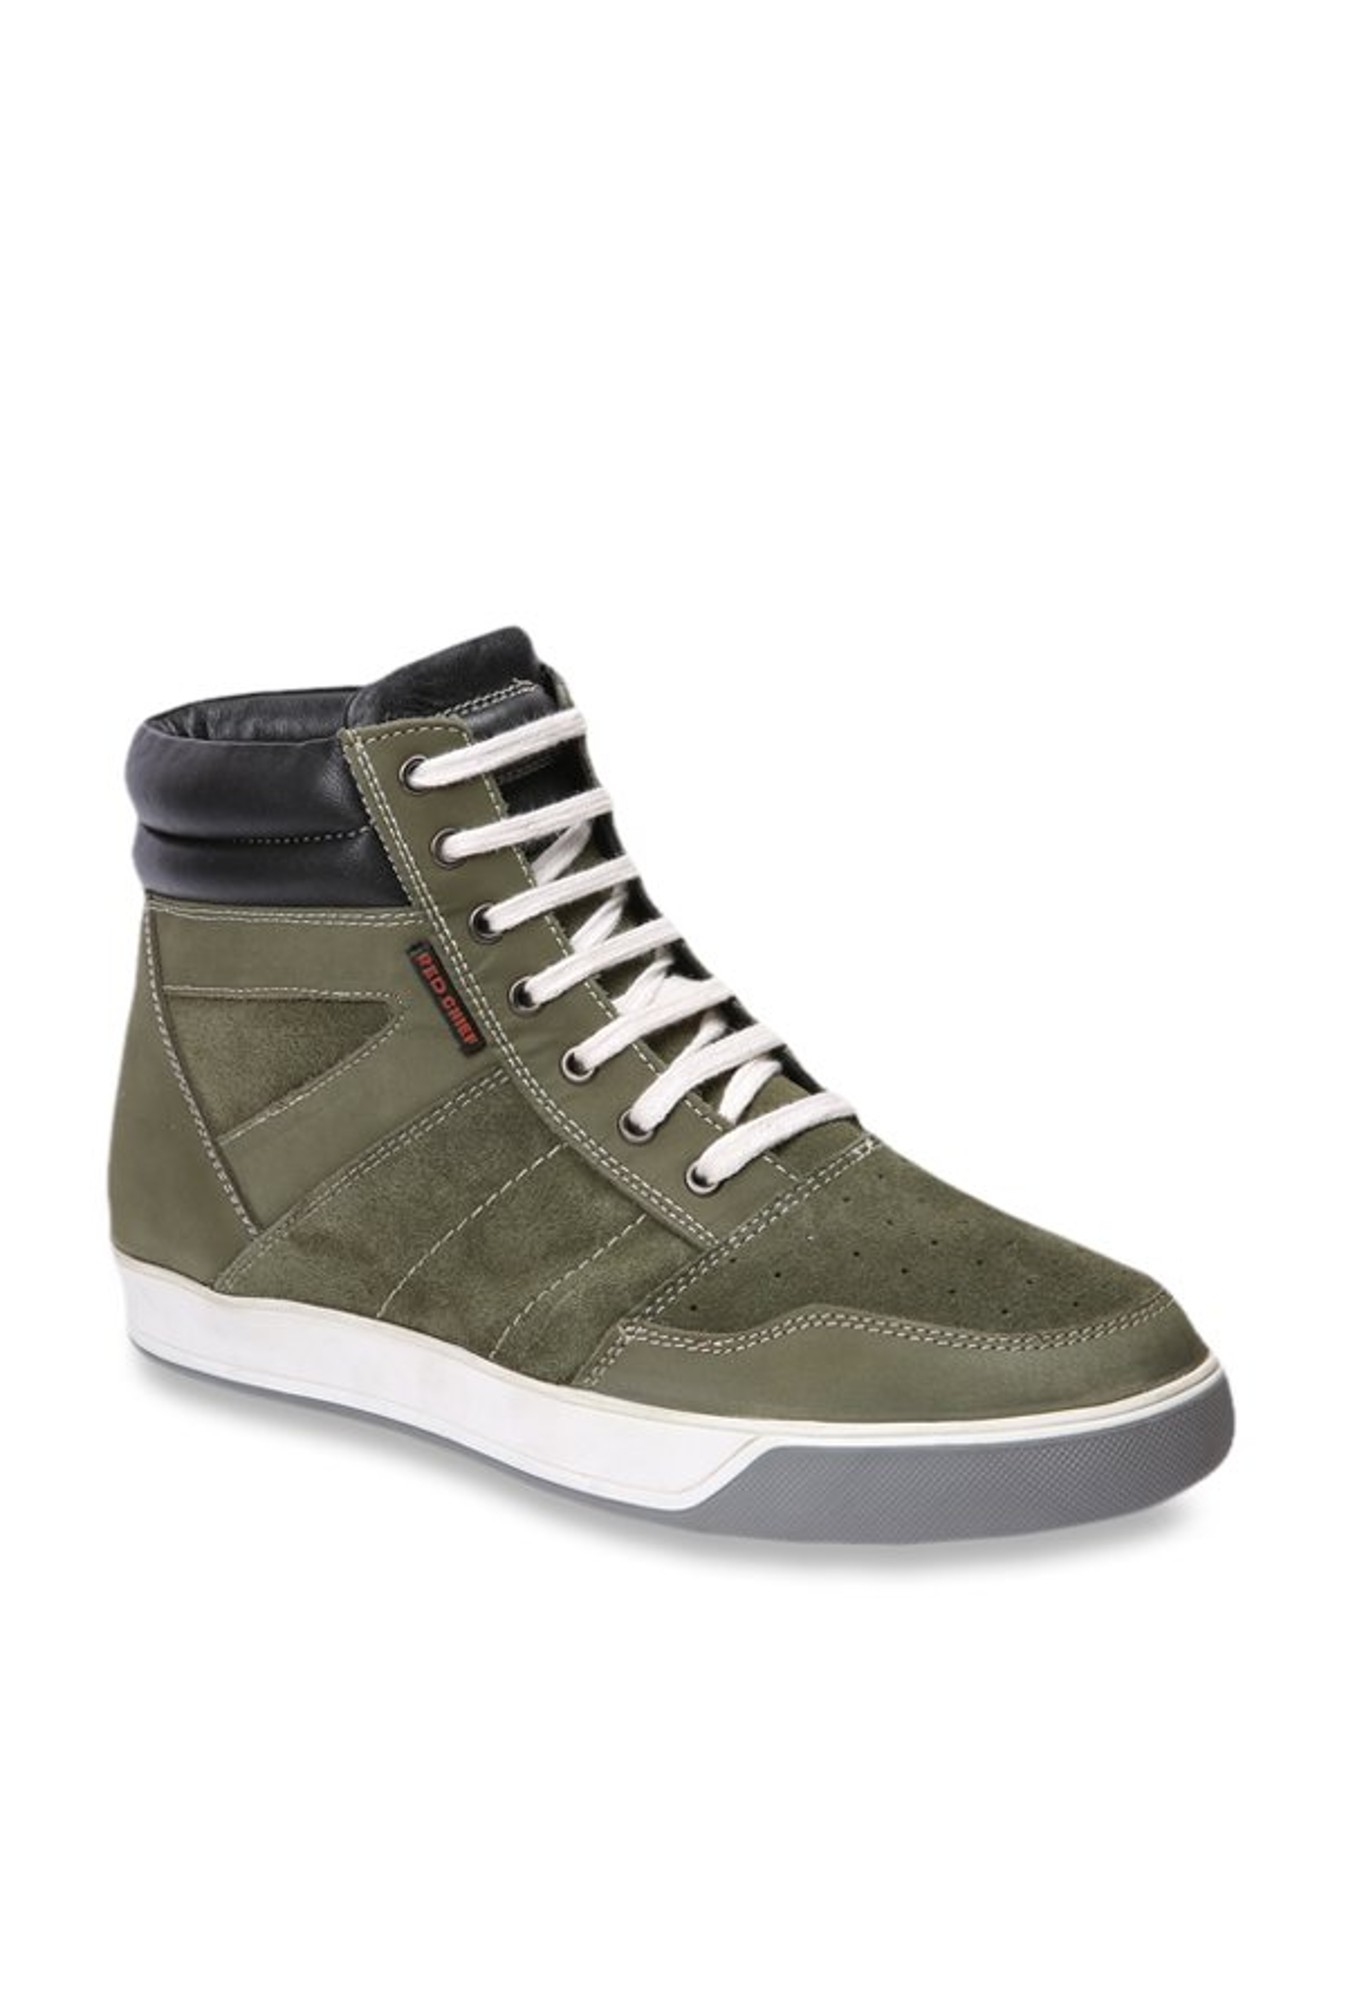 Buy Red Chief Olive Ankle High Sneakers 